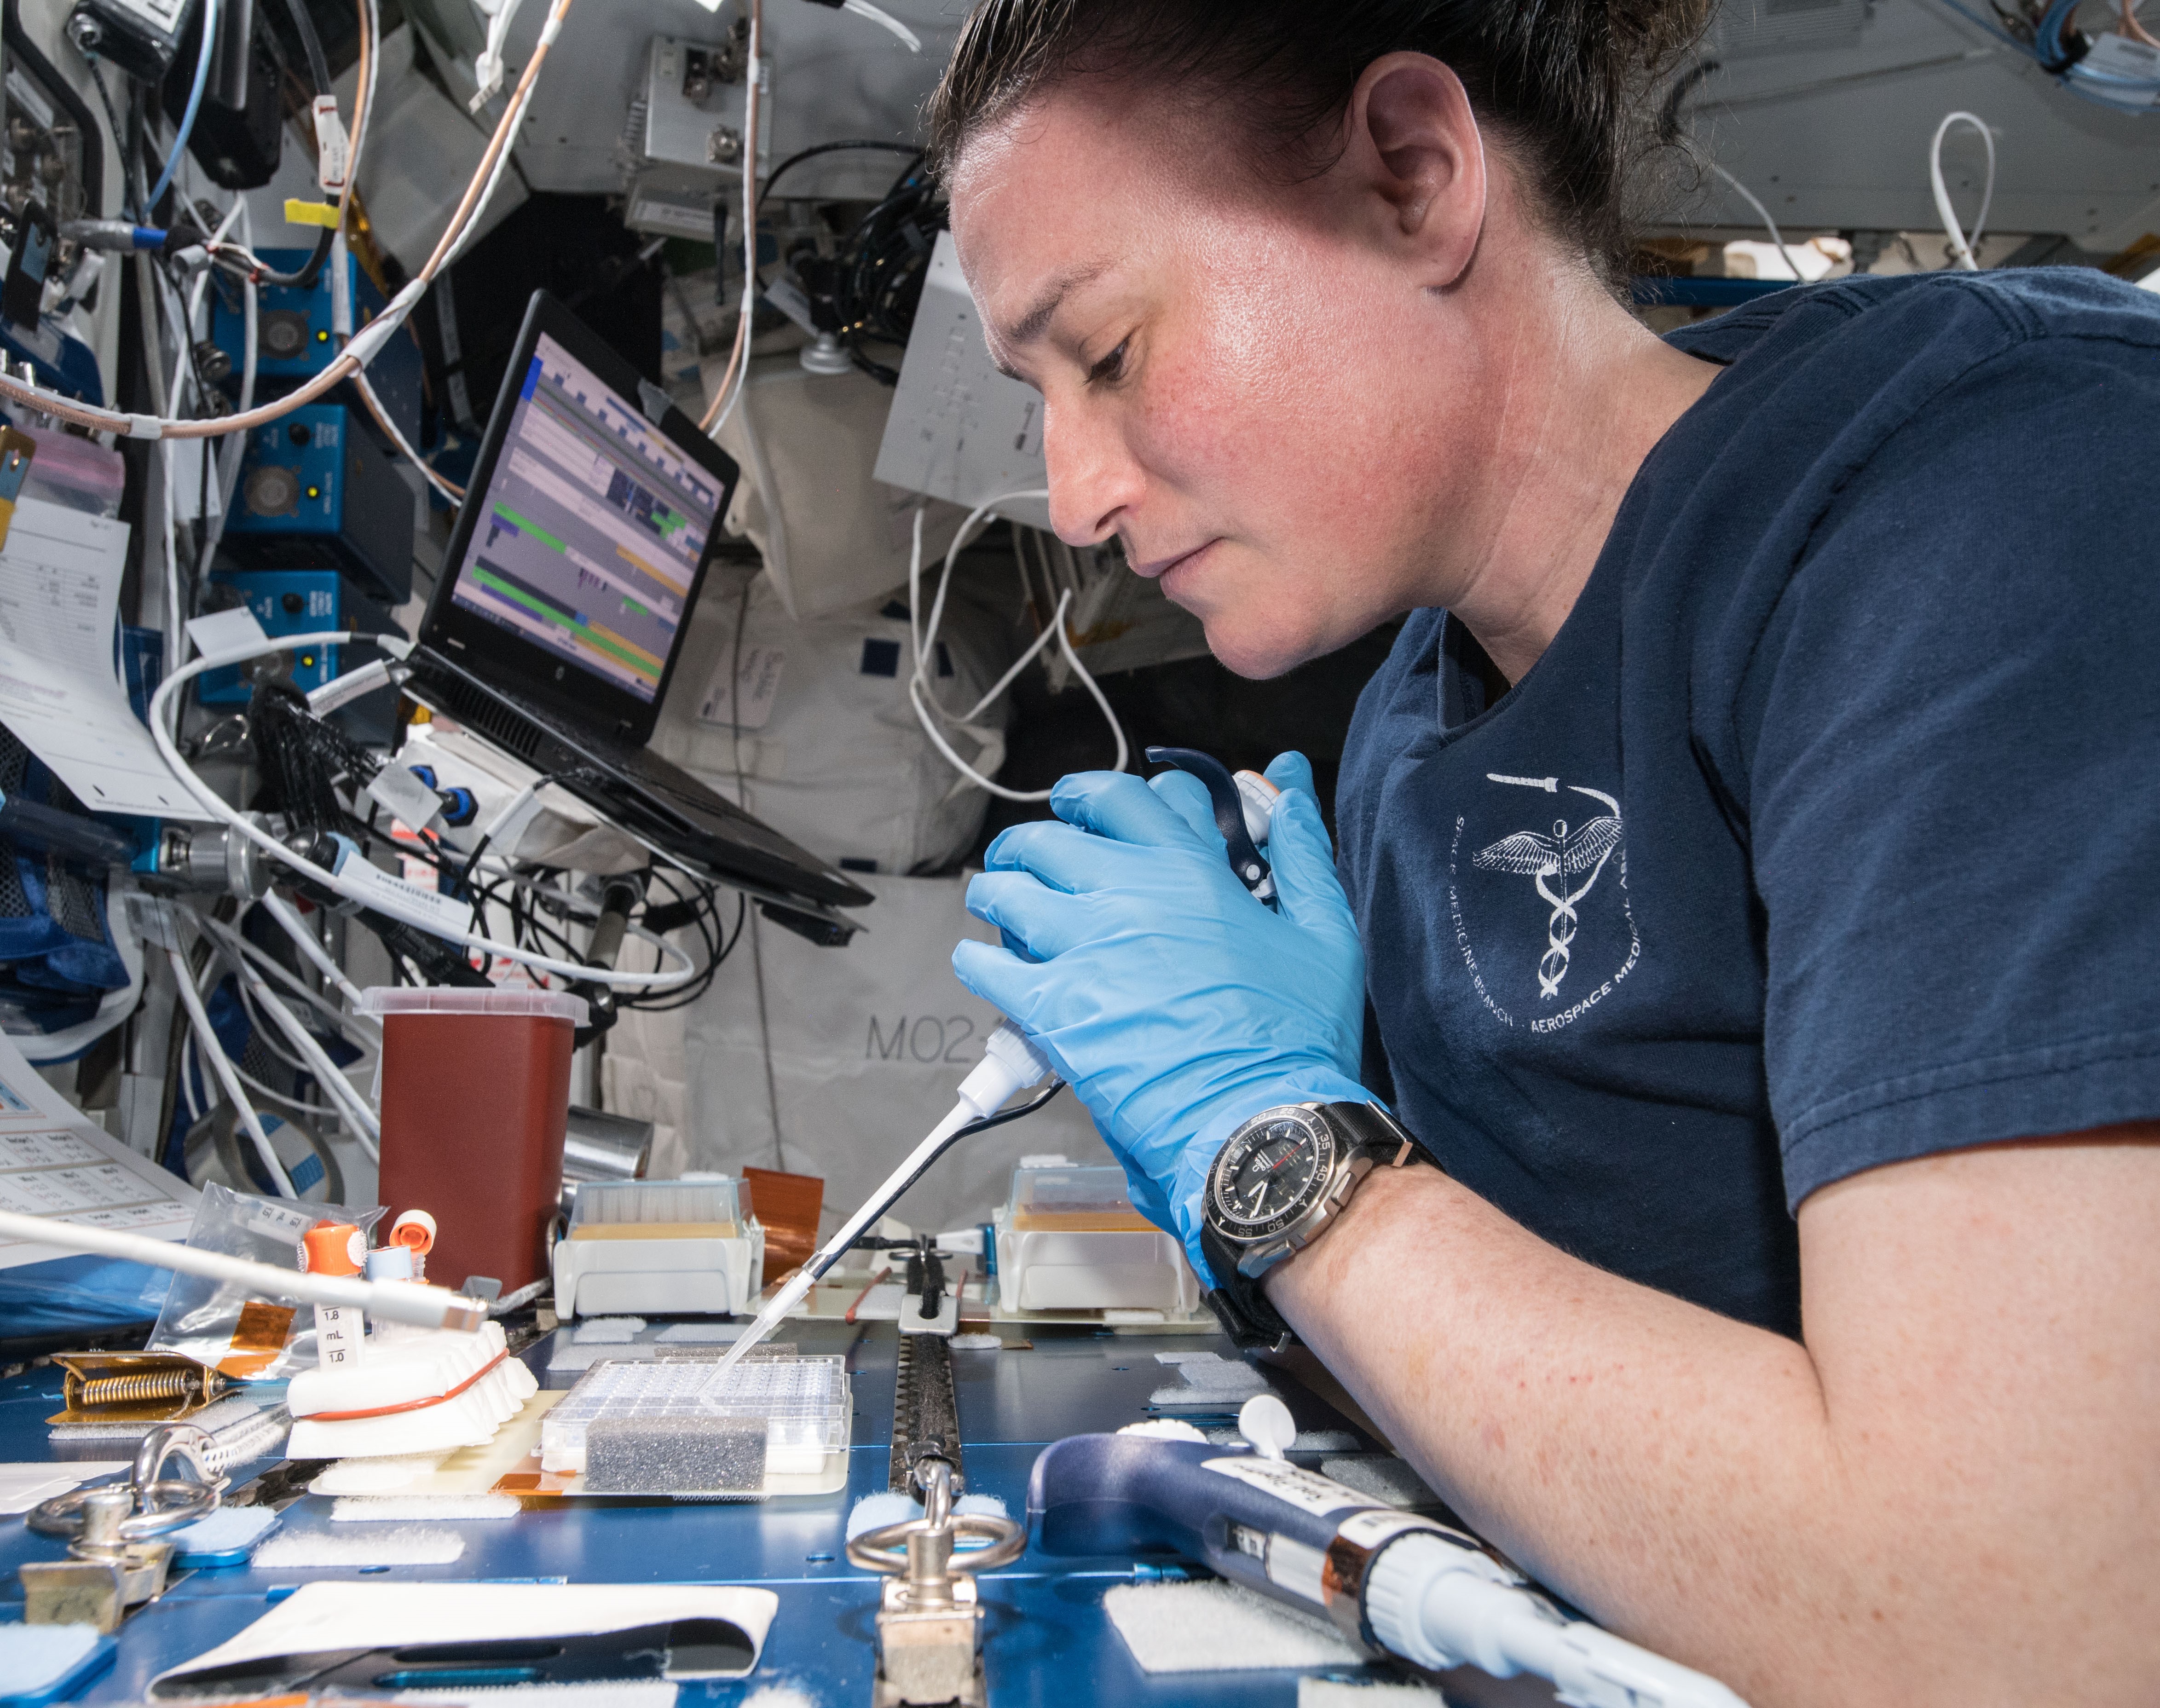 NASA astronaut Serena M. Auñón-Chancellor working on the BioServe Protein Crystalography-1 experiment